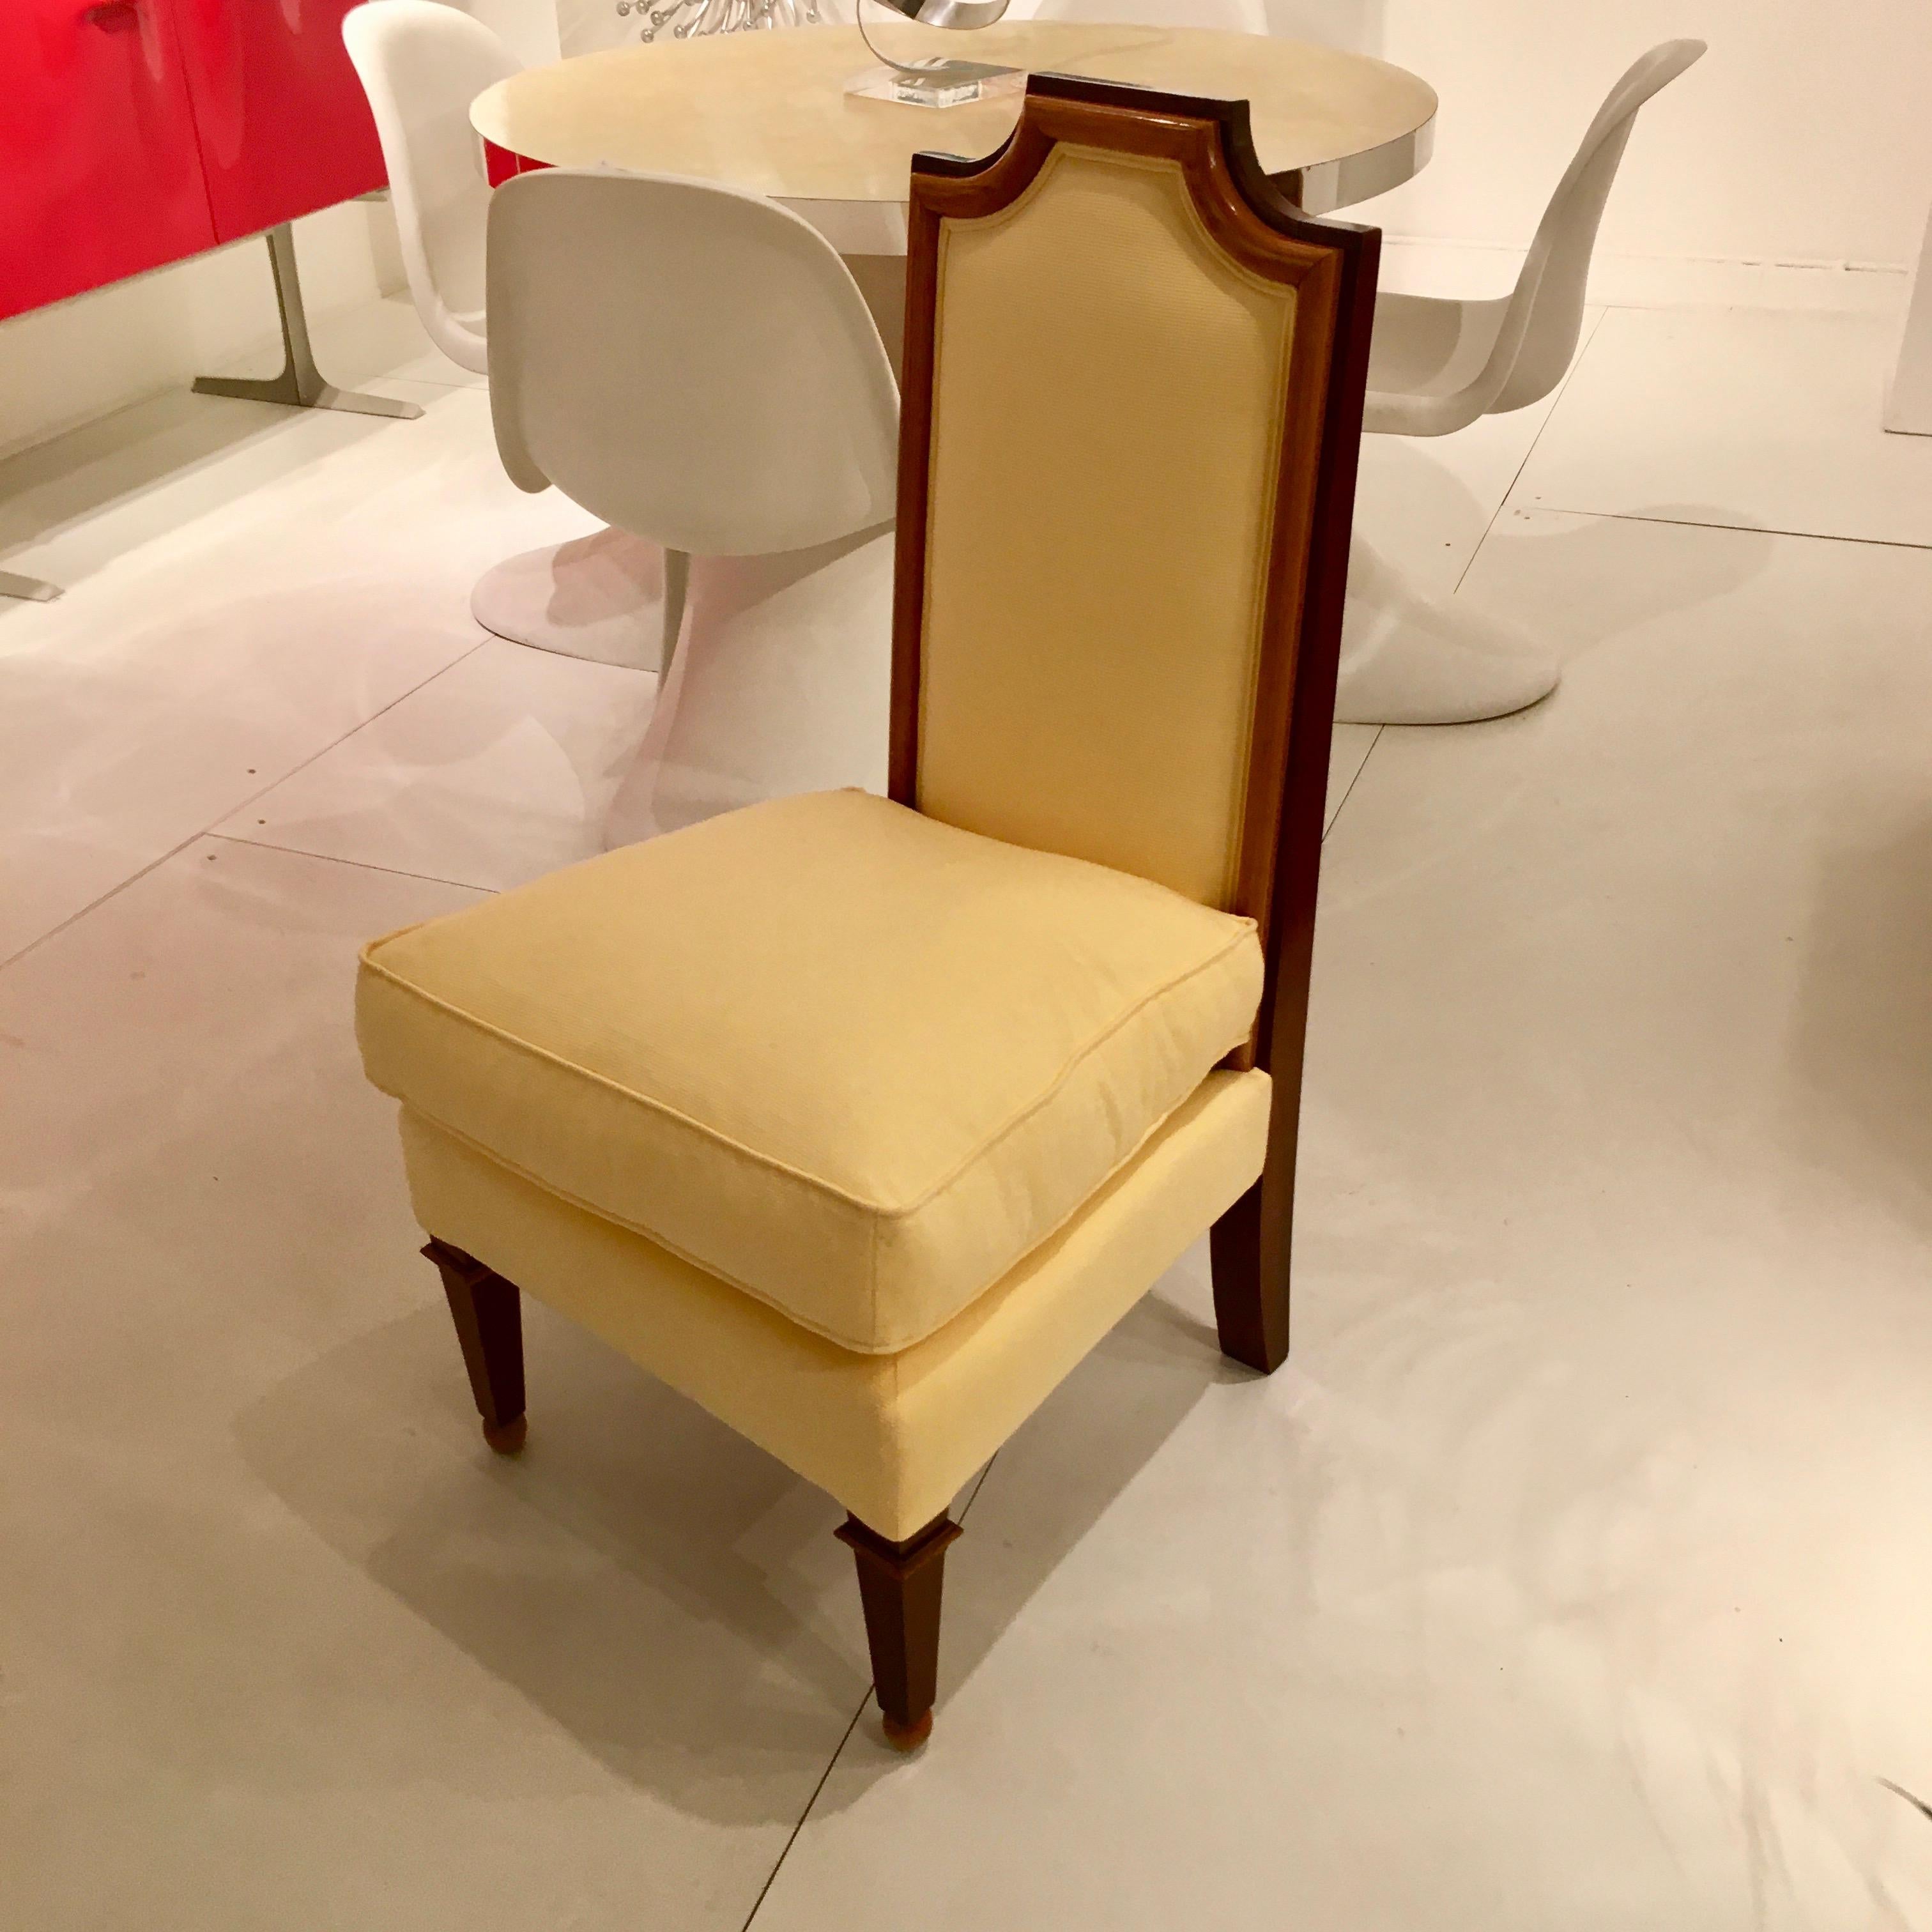 Elegant Neoclassical Chair by Jean-Maurice Rothschild, France, 1948 For Sale 4